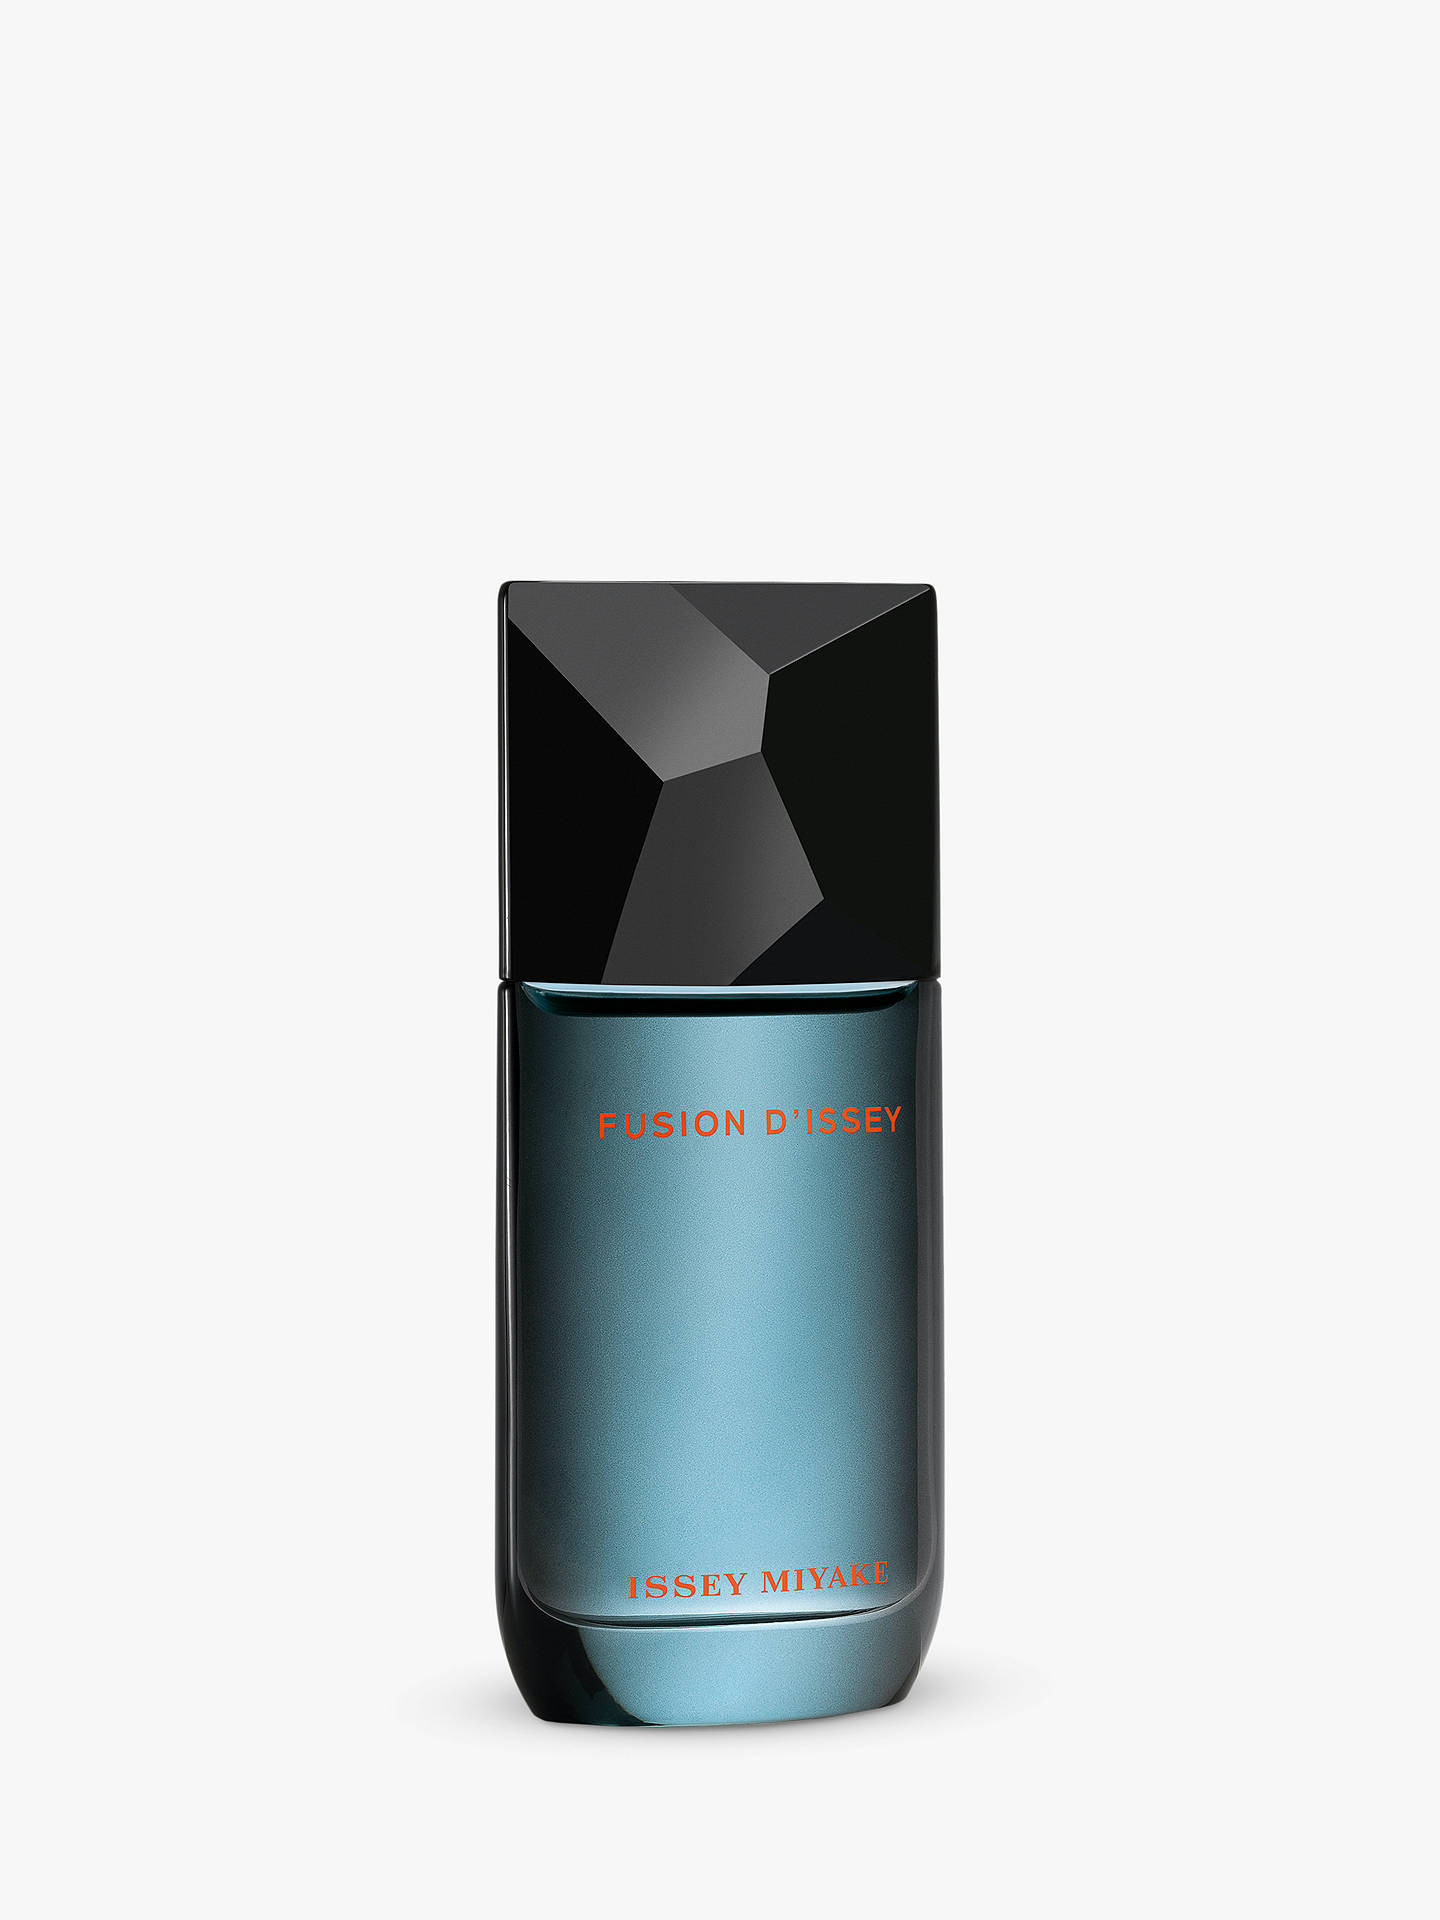 Issey Miyake Fusion d'Issey Eau de Toilette at John Lewis & Partners